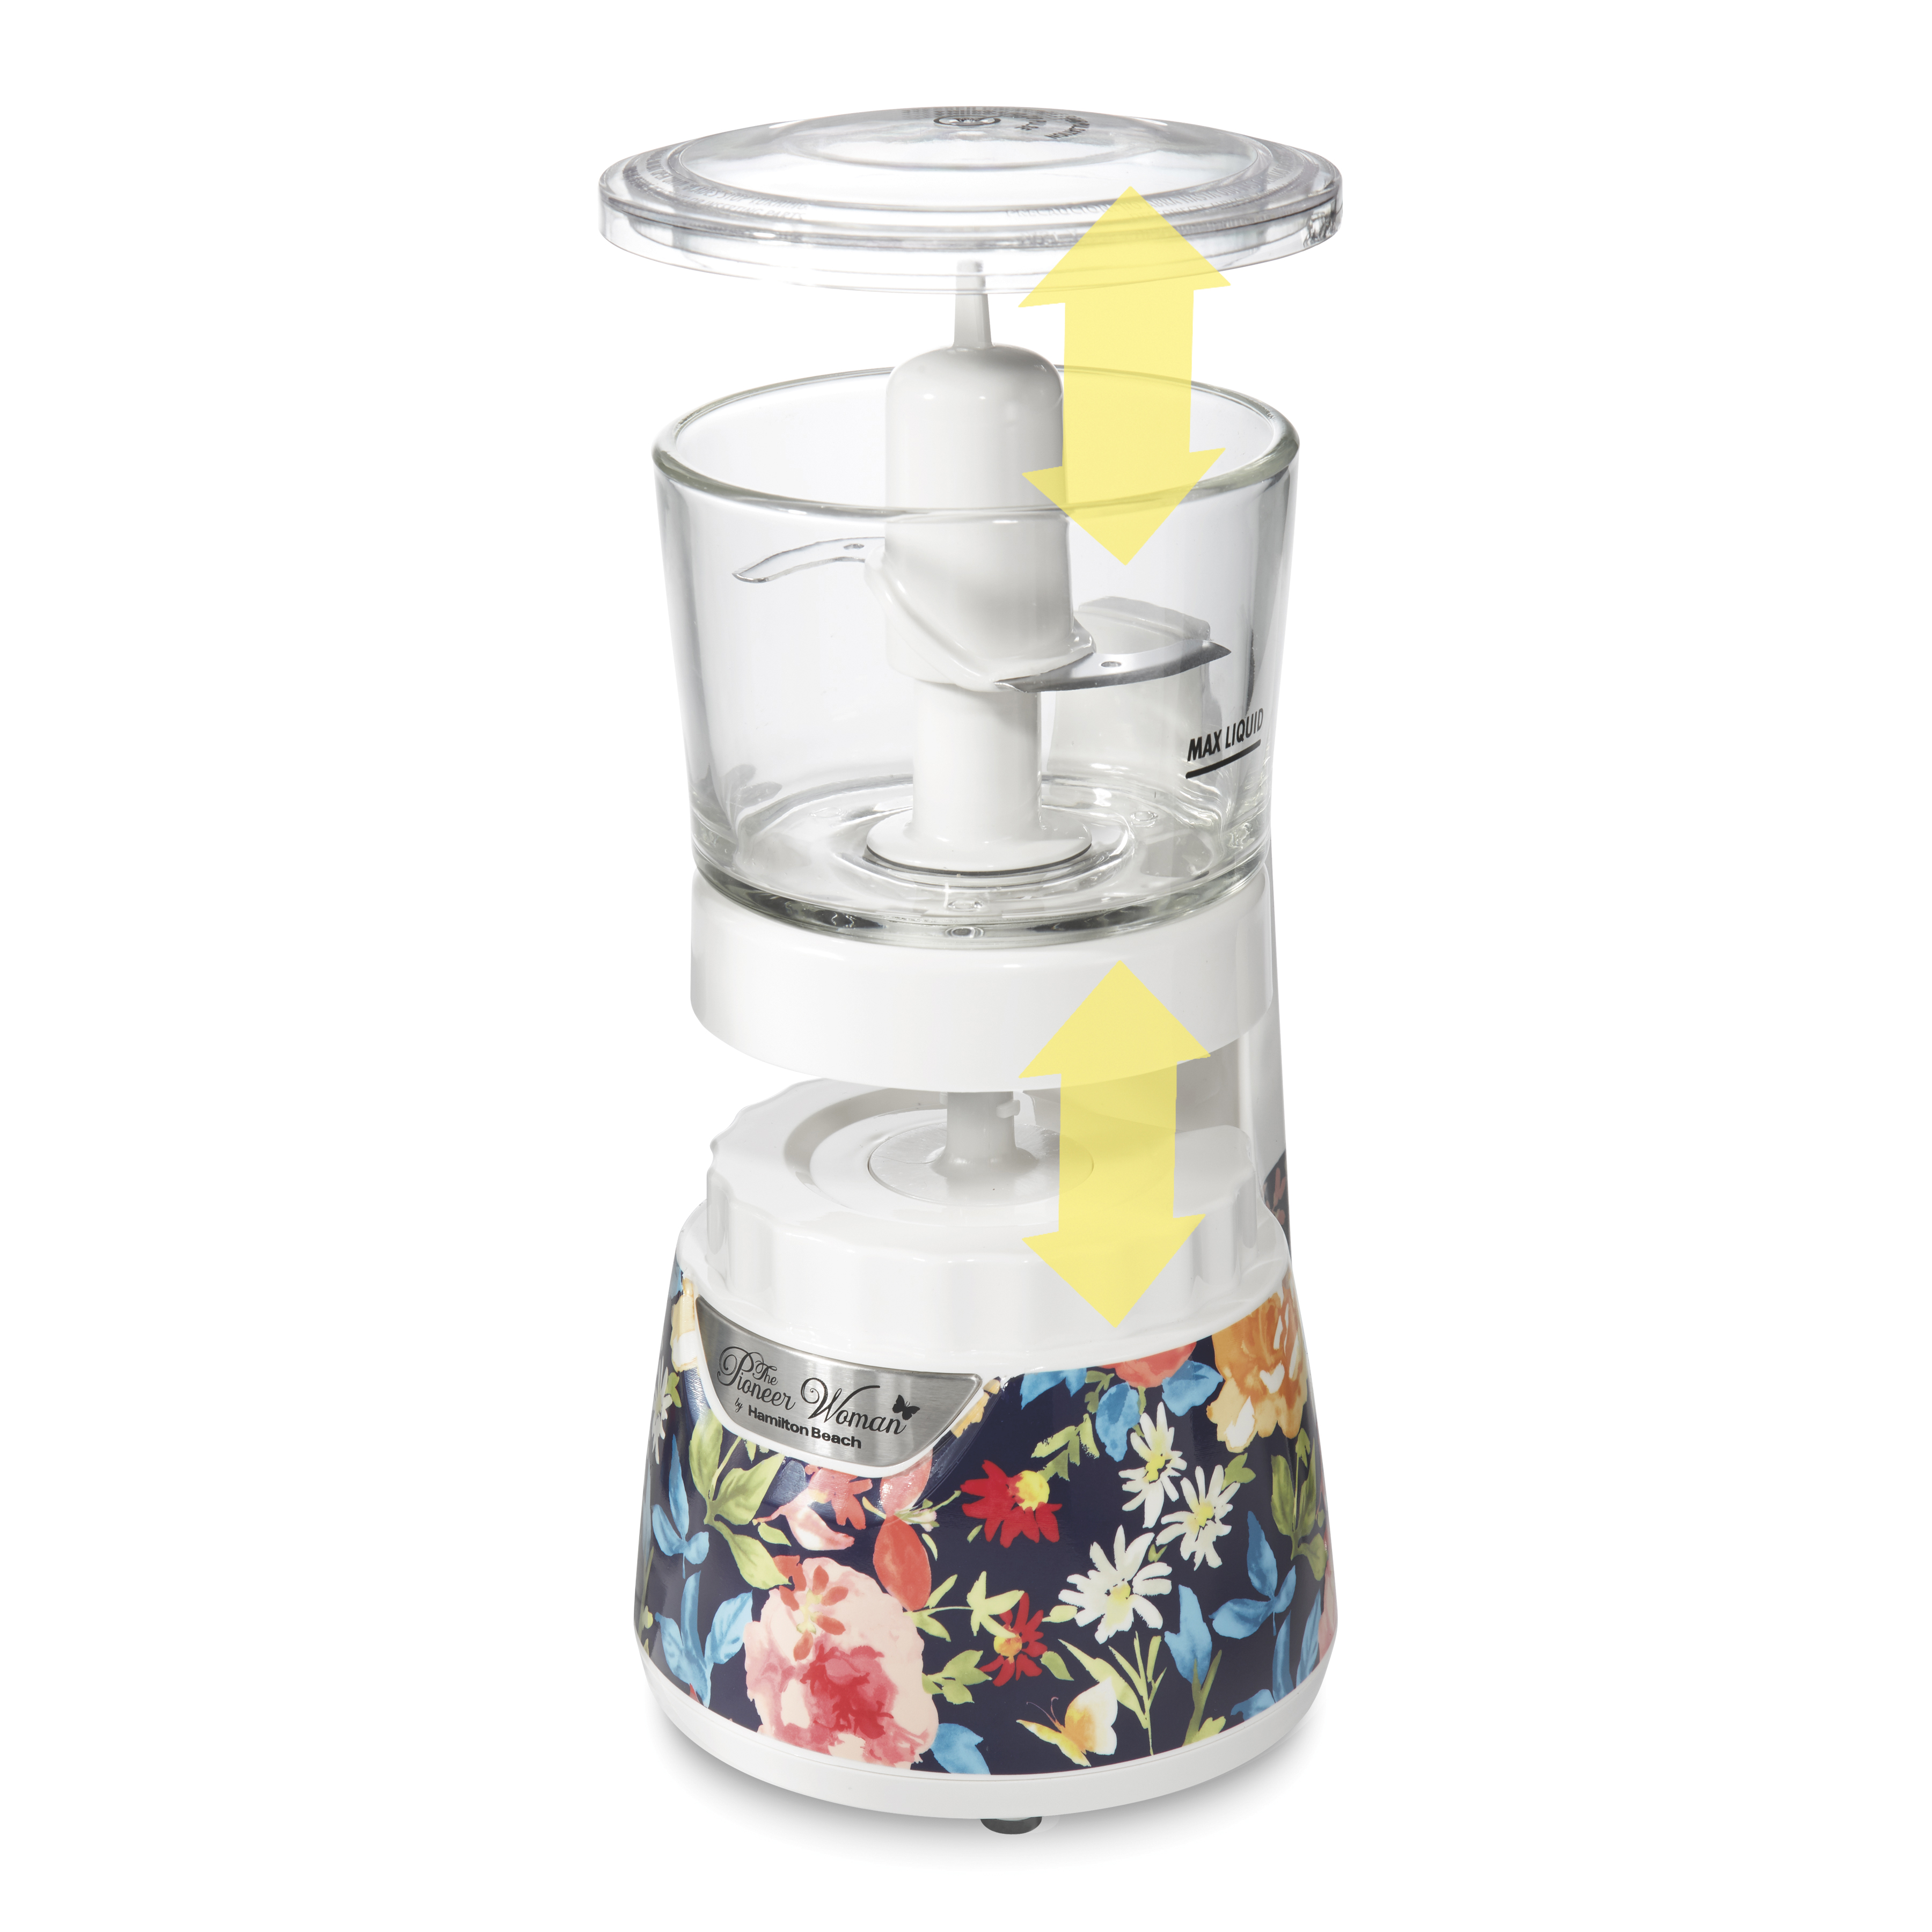 The Pioneer Woman Fiona Floral Stack & Press Glass Bowl Food Chopper, 3 Cup Capacity - image 2 of 5